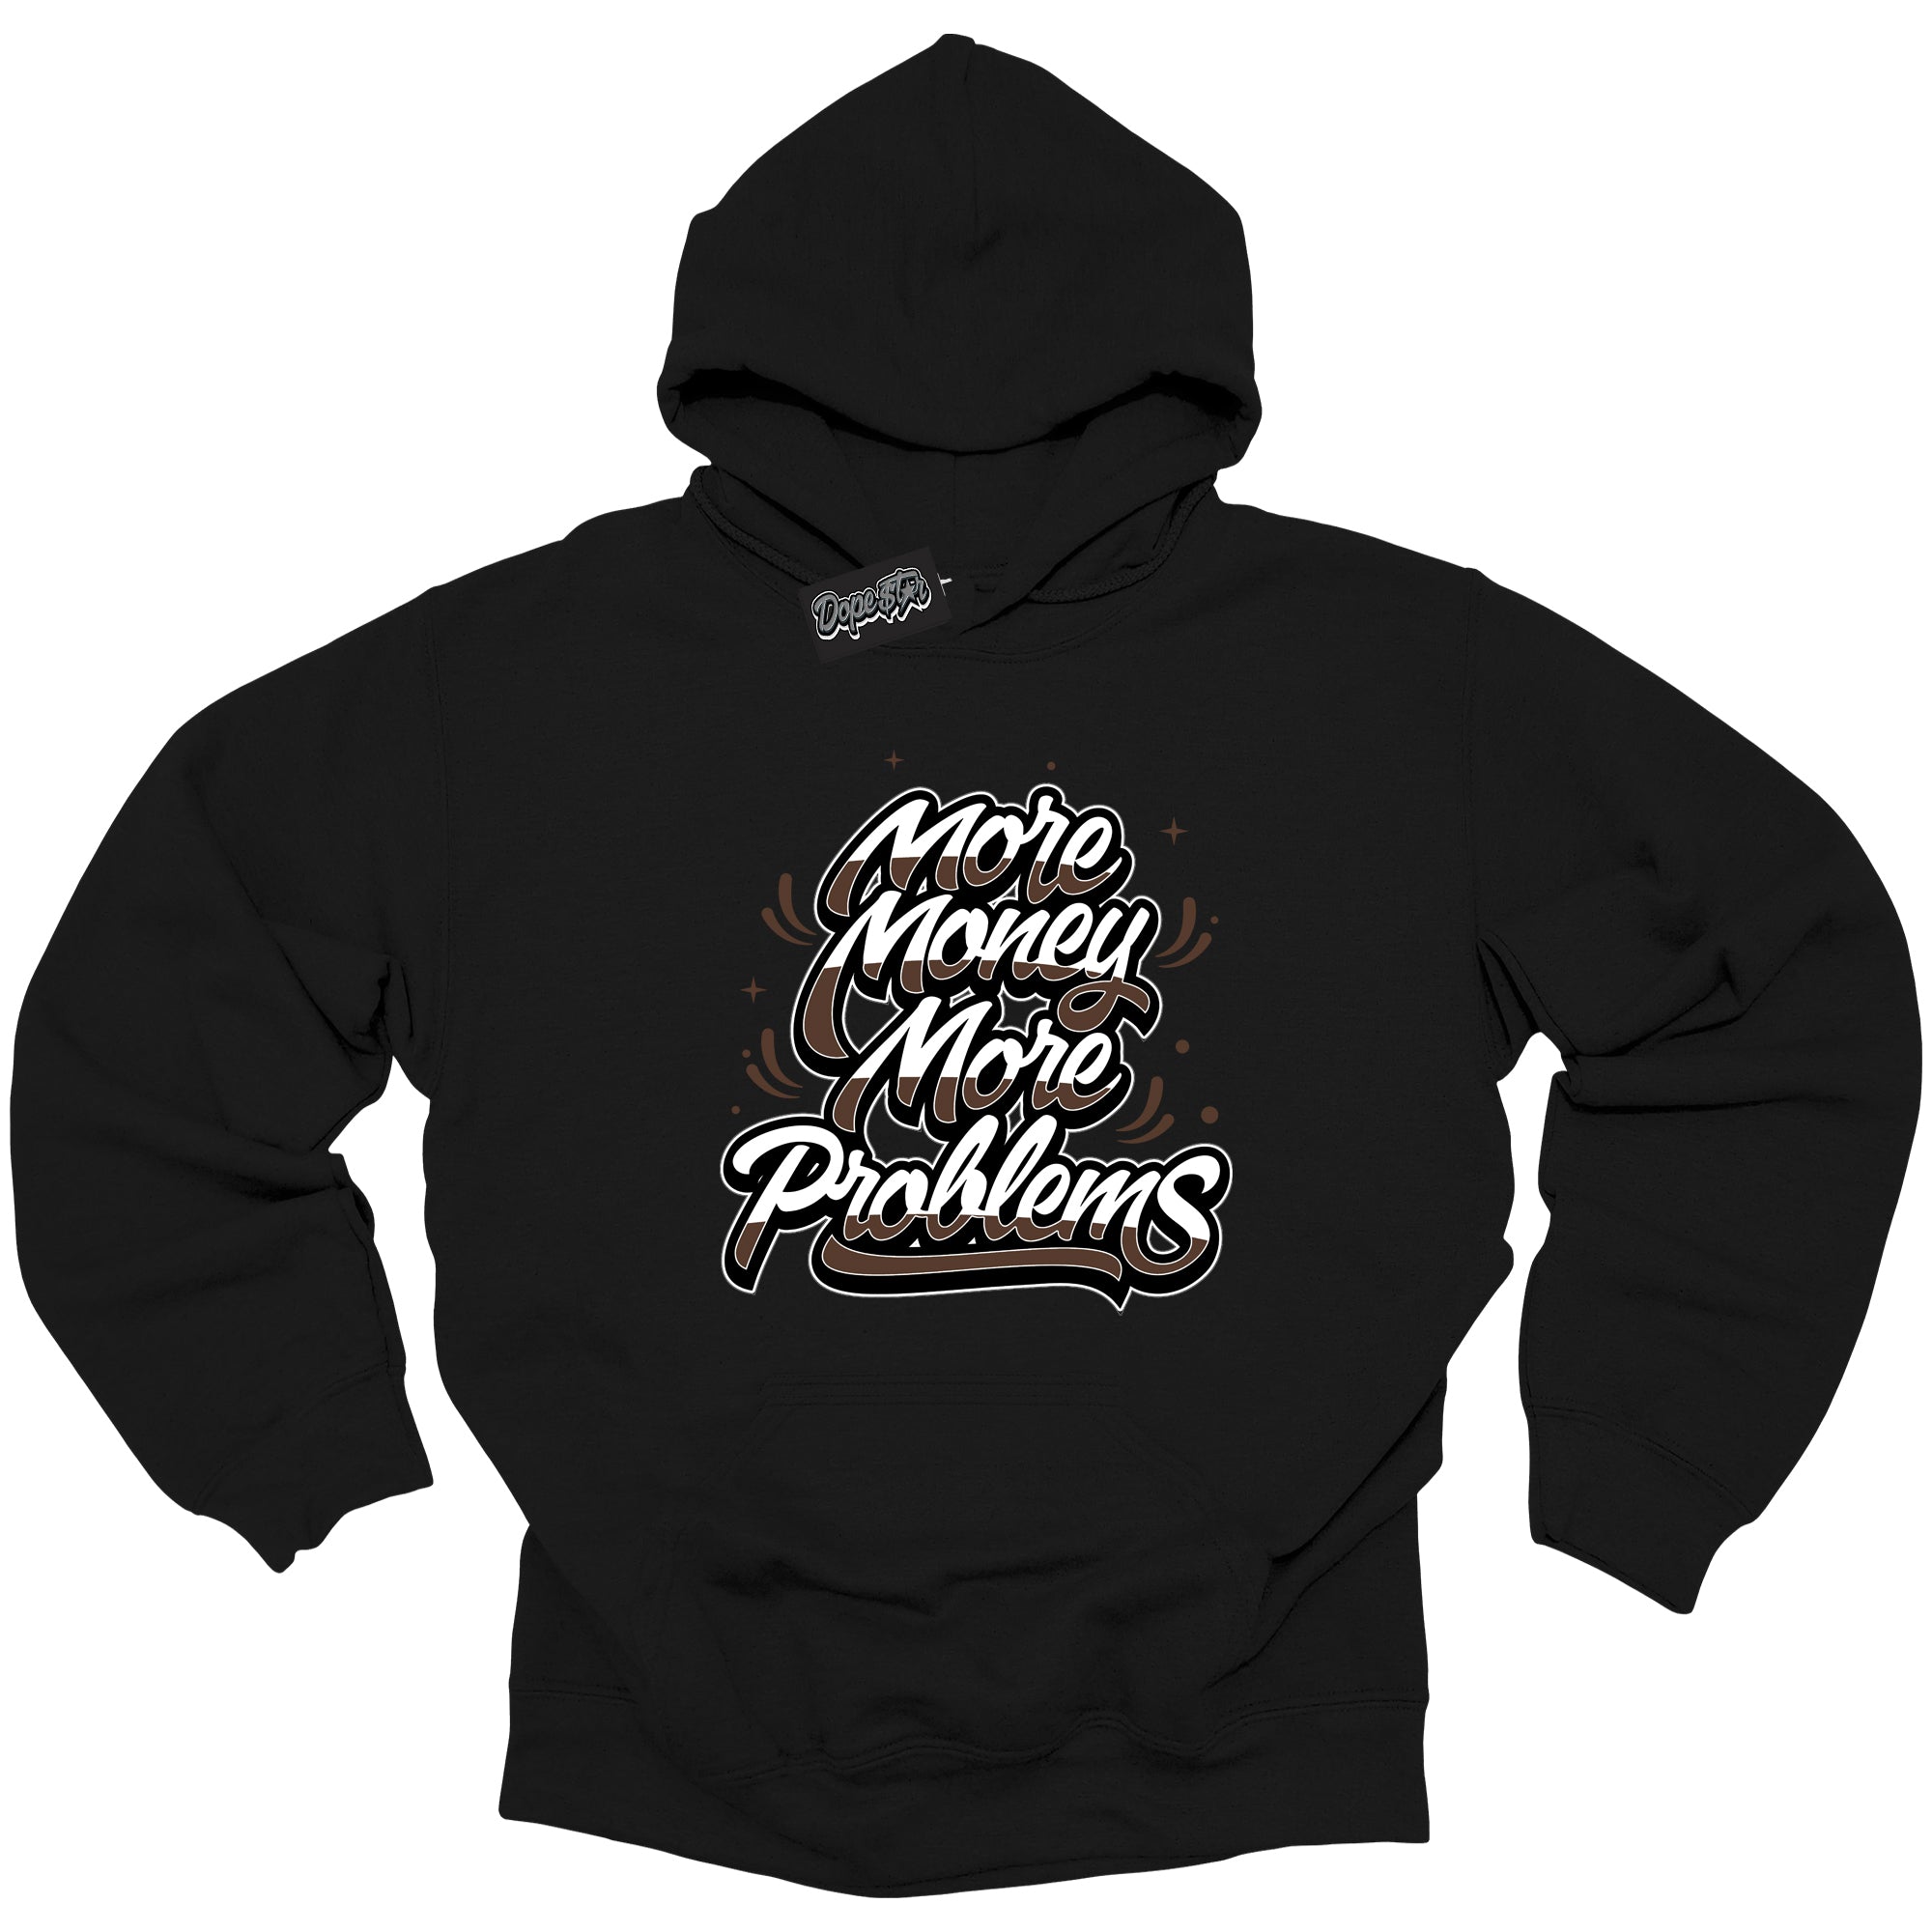 Cool Black Graphic DopeStar Hoodie with “ More Money More Problems “ print, that perfectly matches Palomino 1s sneakers